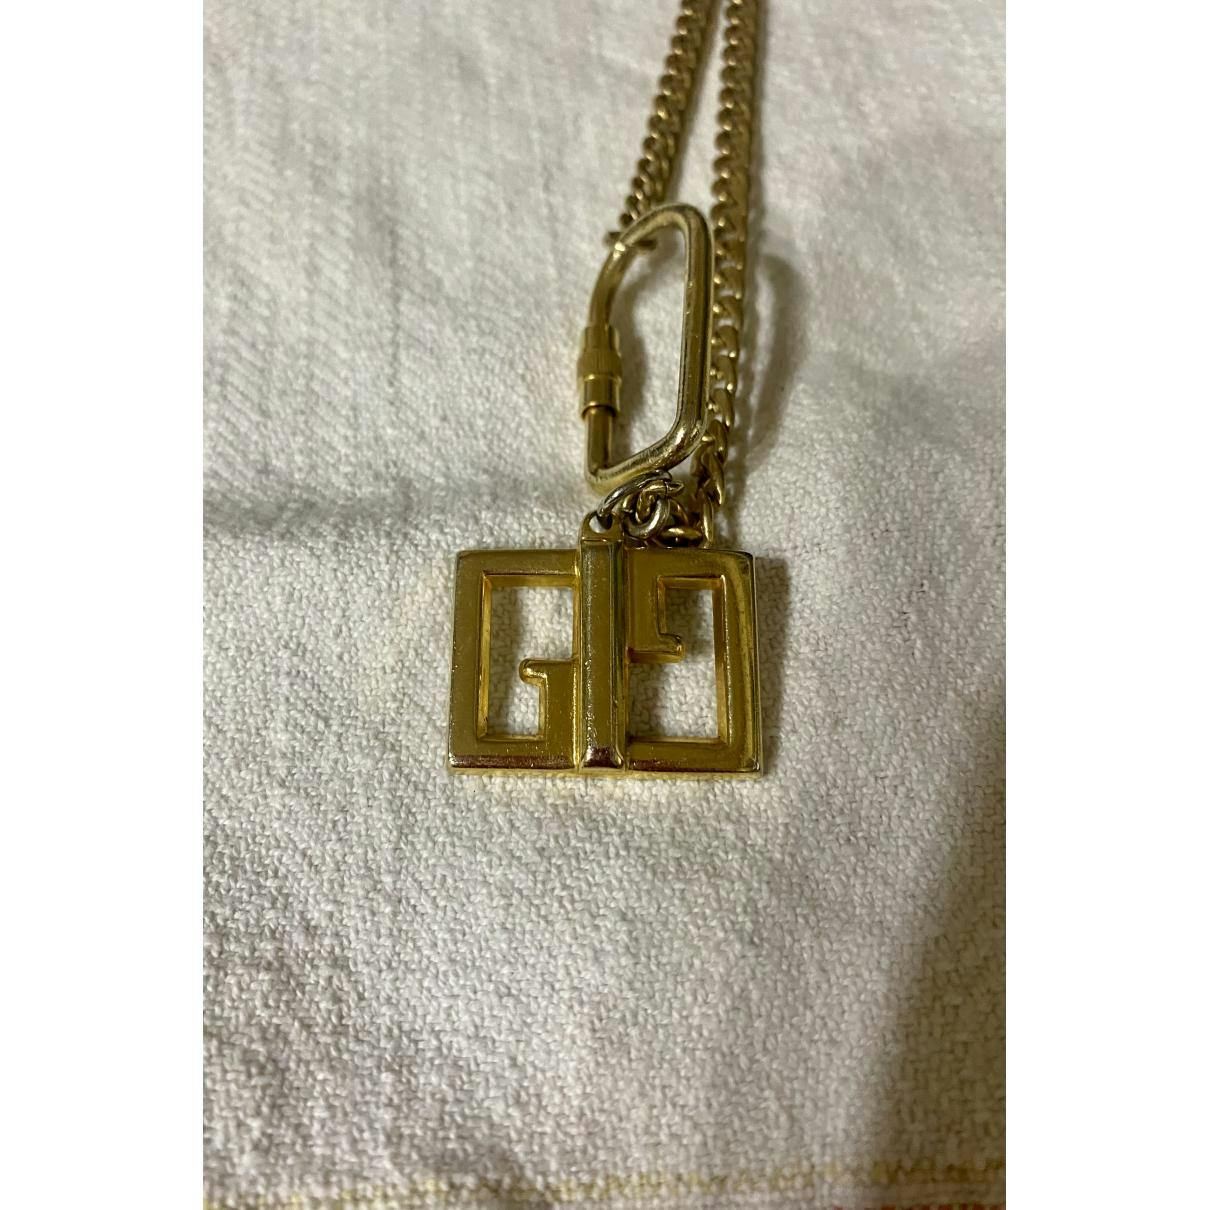 https://images.vestiairecollective.com/cdn-cgi/image/q=75,f=auto,/produit/gold-gold-plated-gg-running-gucci-necklace-35343107-4_2.jpg?secret=VC-e9eee96a-a819-4431-ad12-d066be2626ef